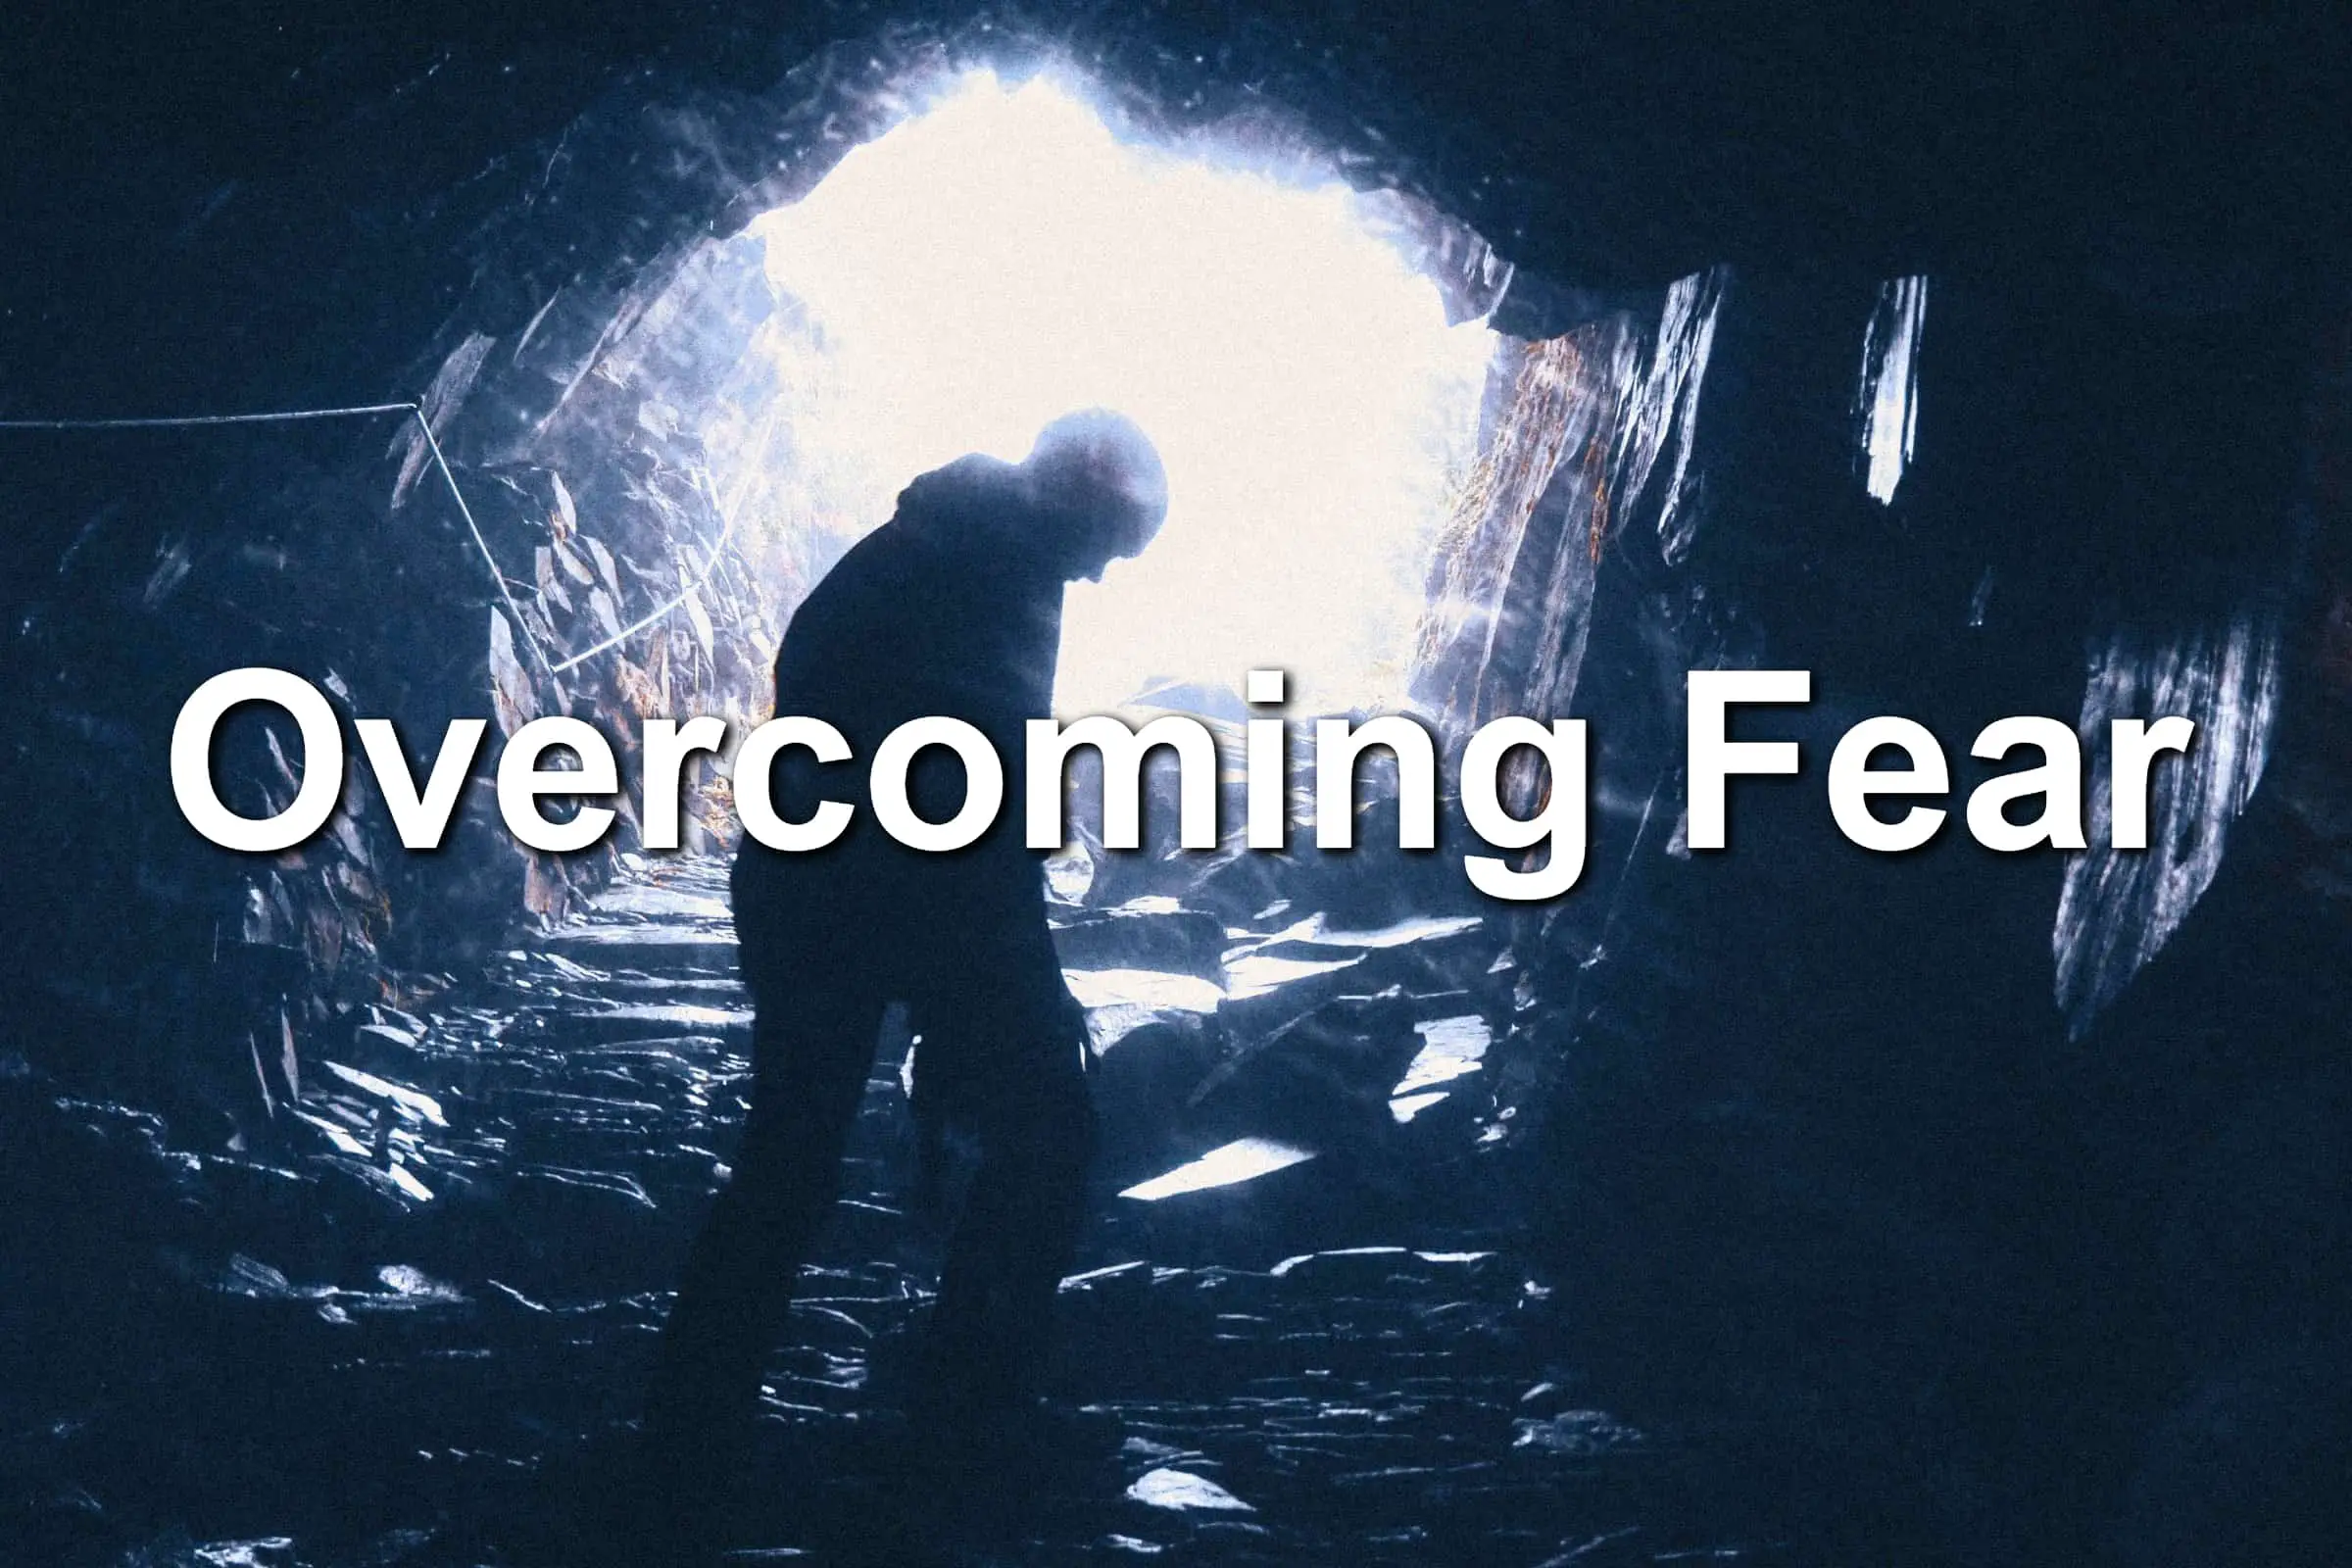 Man exciting a fearful looking cave while overcoming fear